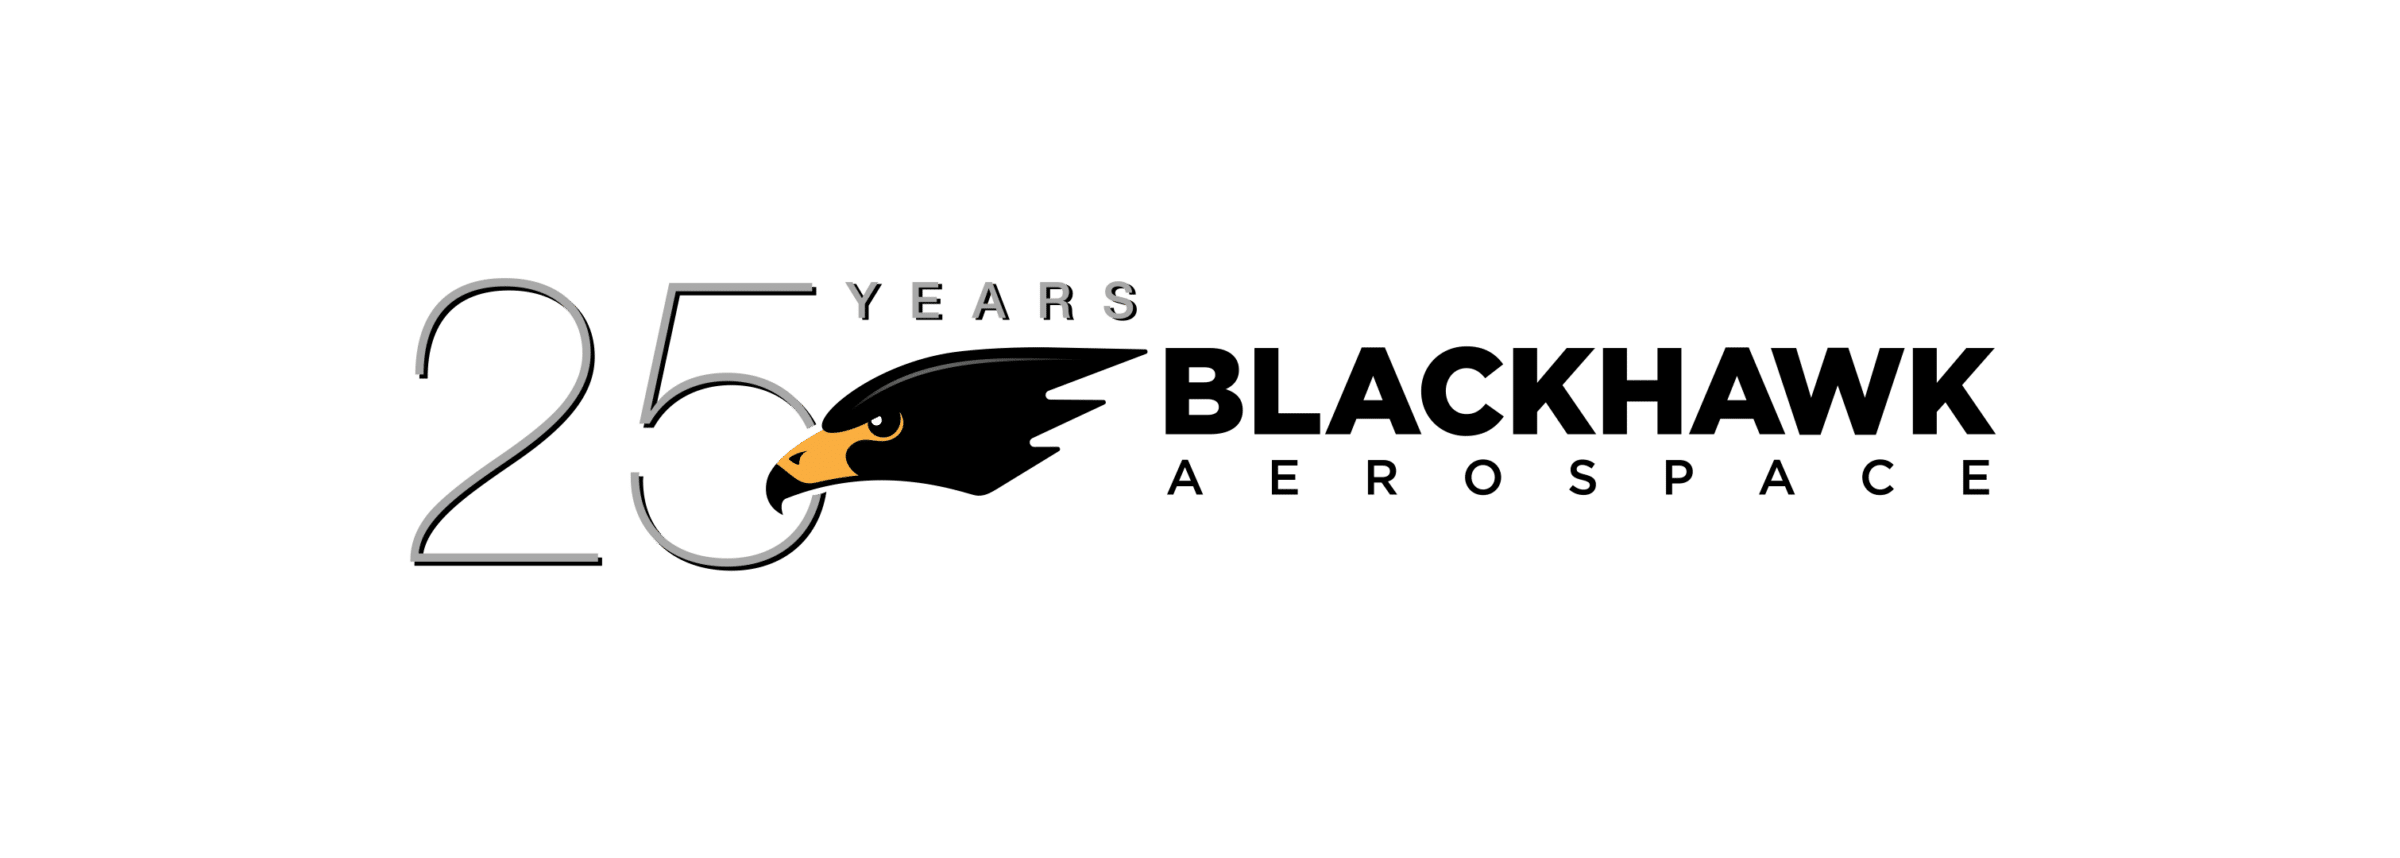 A Quarter Century of Innovation: Blackhawk Aerospace Marks 25th Anniversary with Leadership Promotions